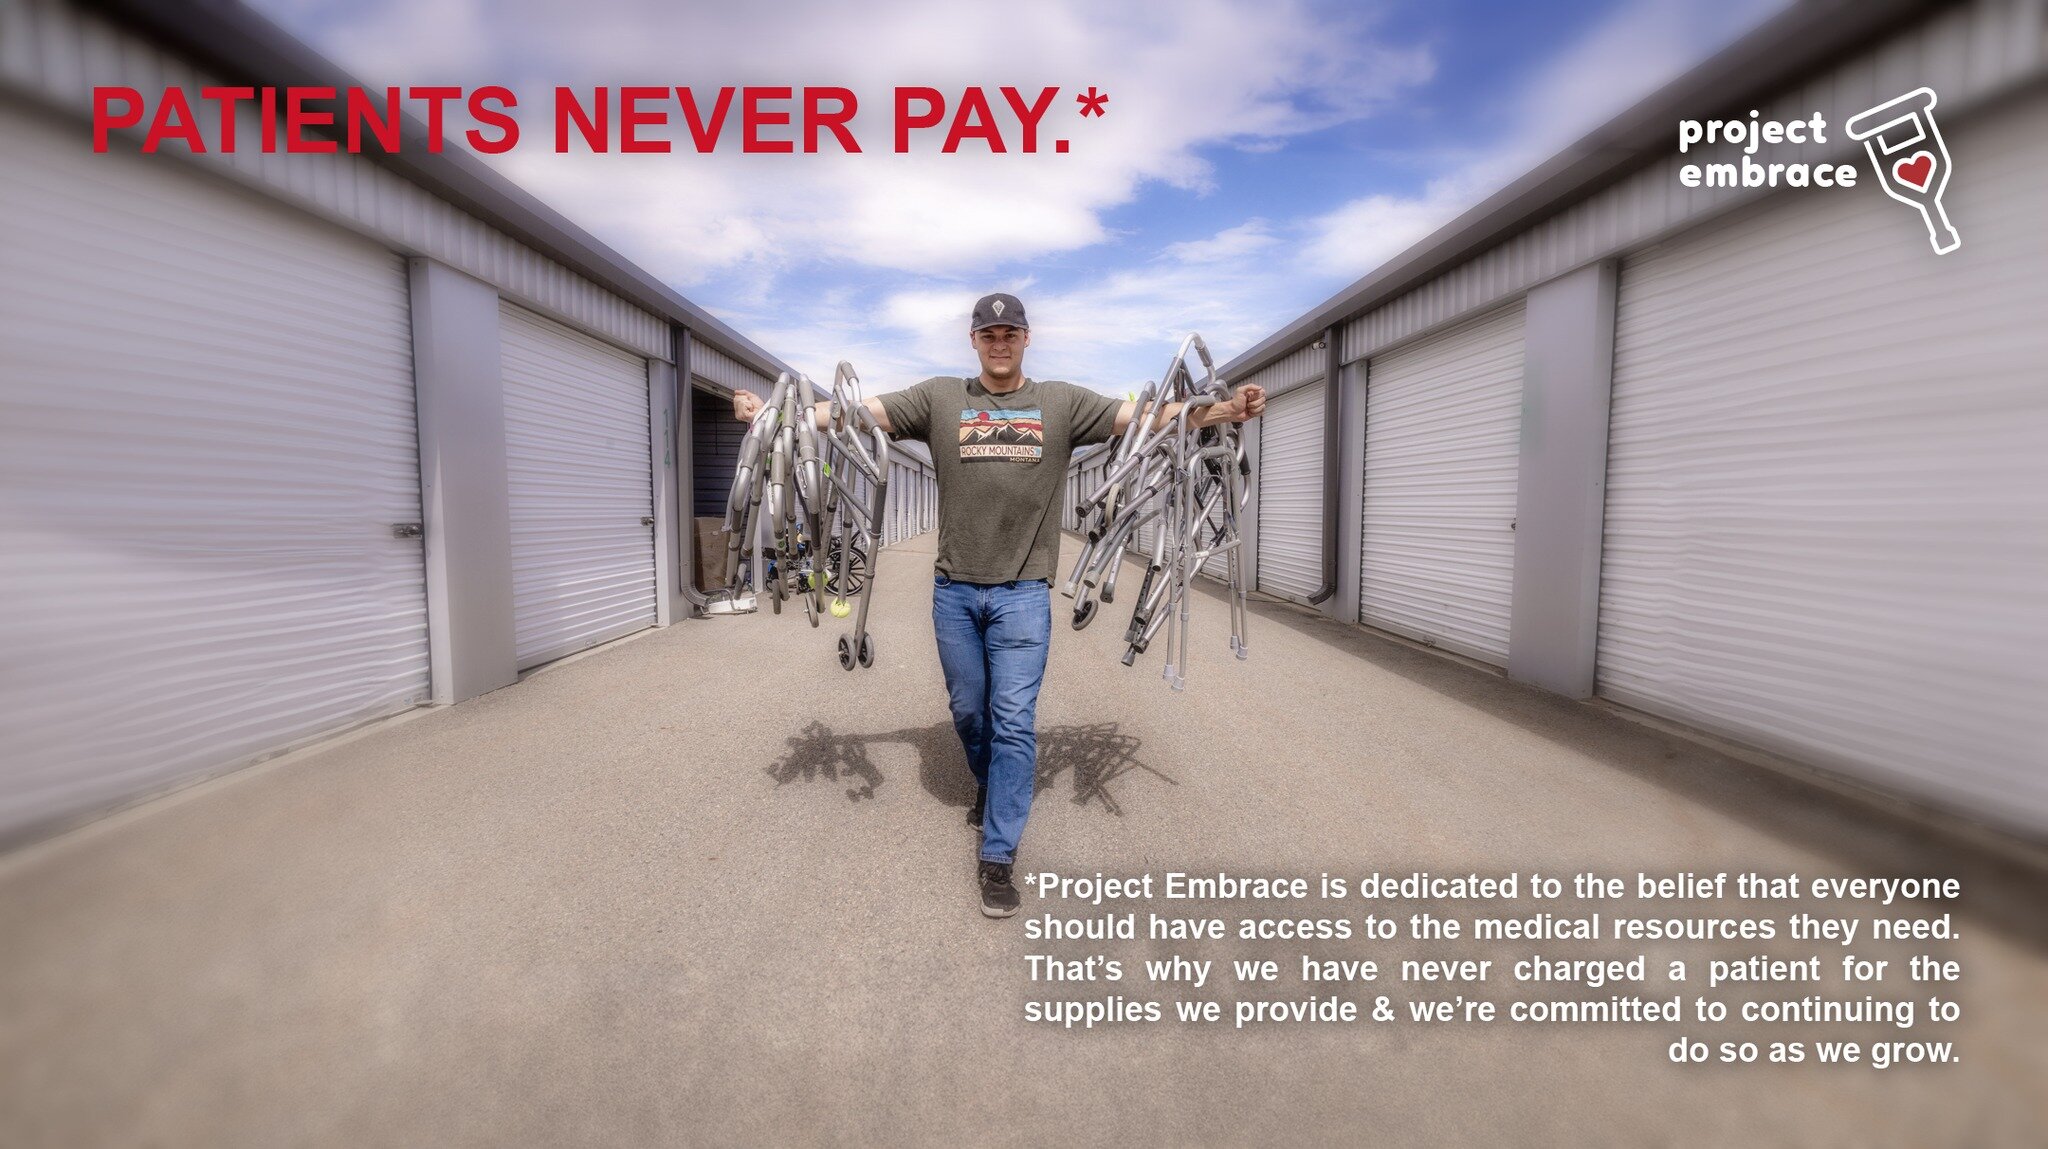 PATIENTS NEVER PAY.*

---

*Project Embrace is dedicated to the belief that everyone should have access to the medical resources they need. That&rsquo;s why we have never charged a patient for the supplies we provide &amp; we&rsquo;re committed to co